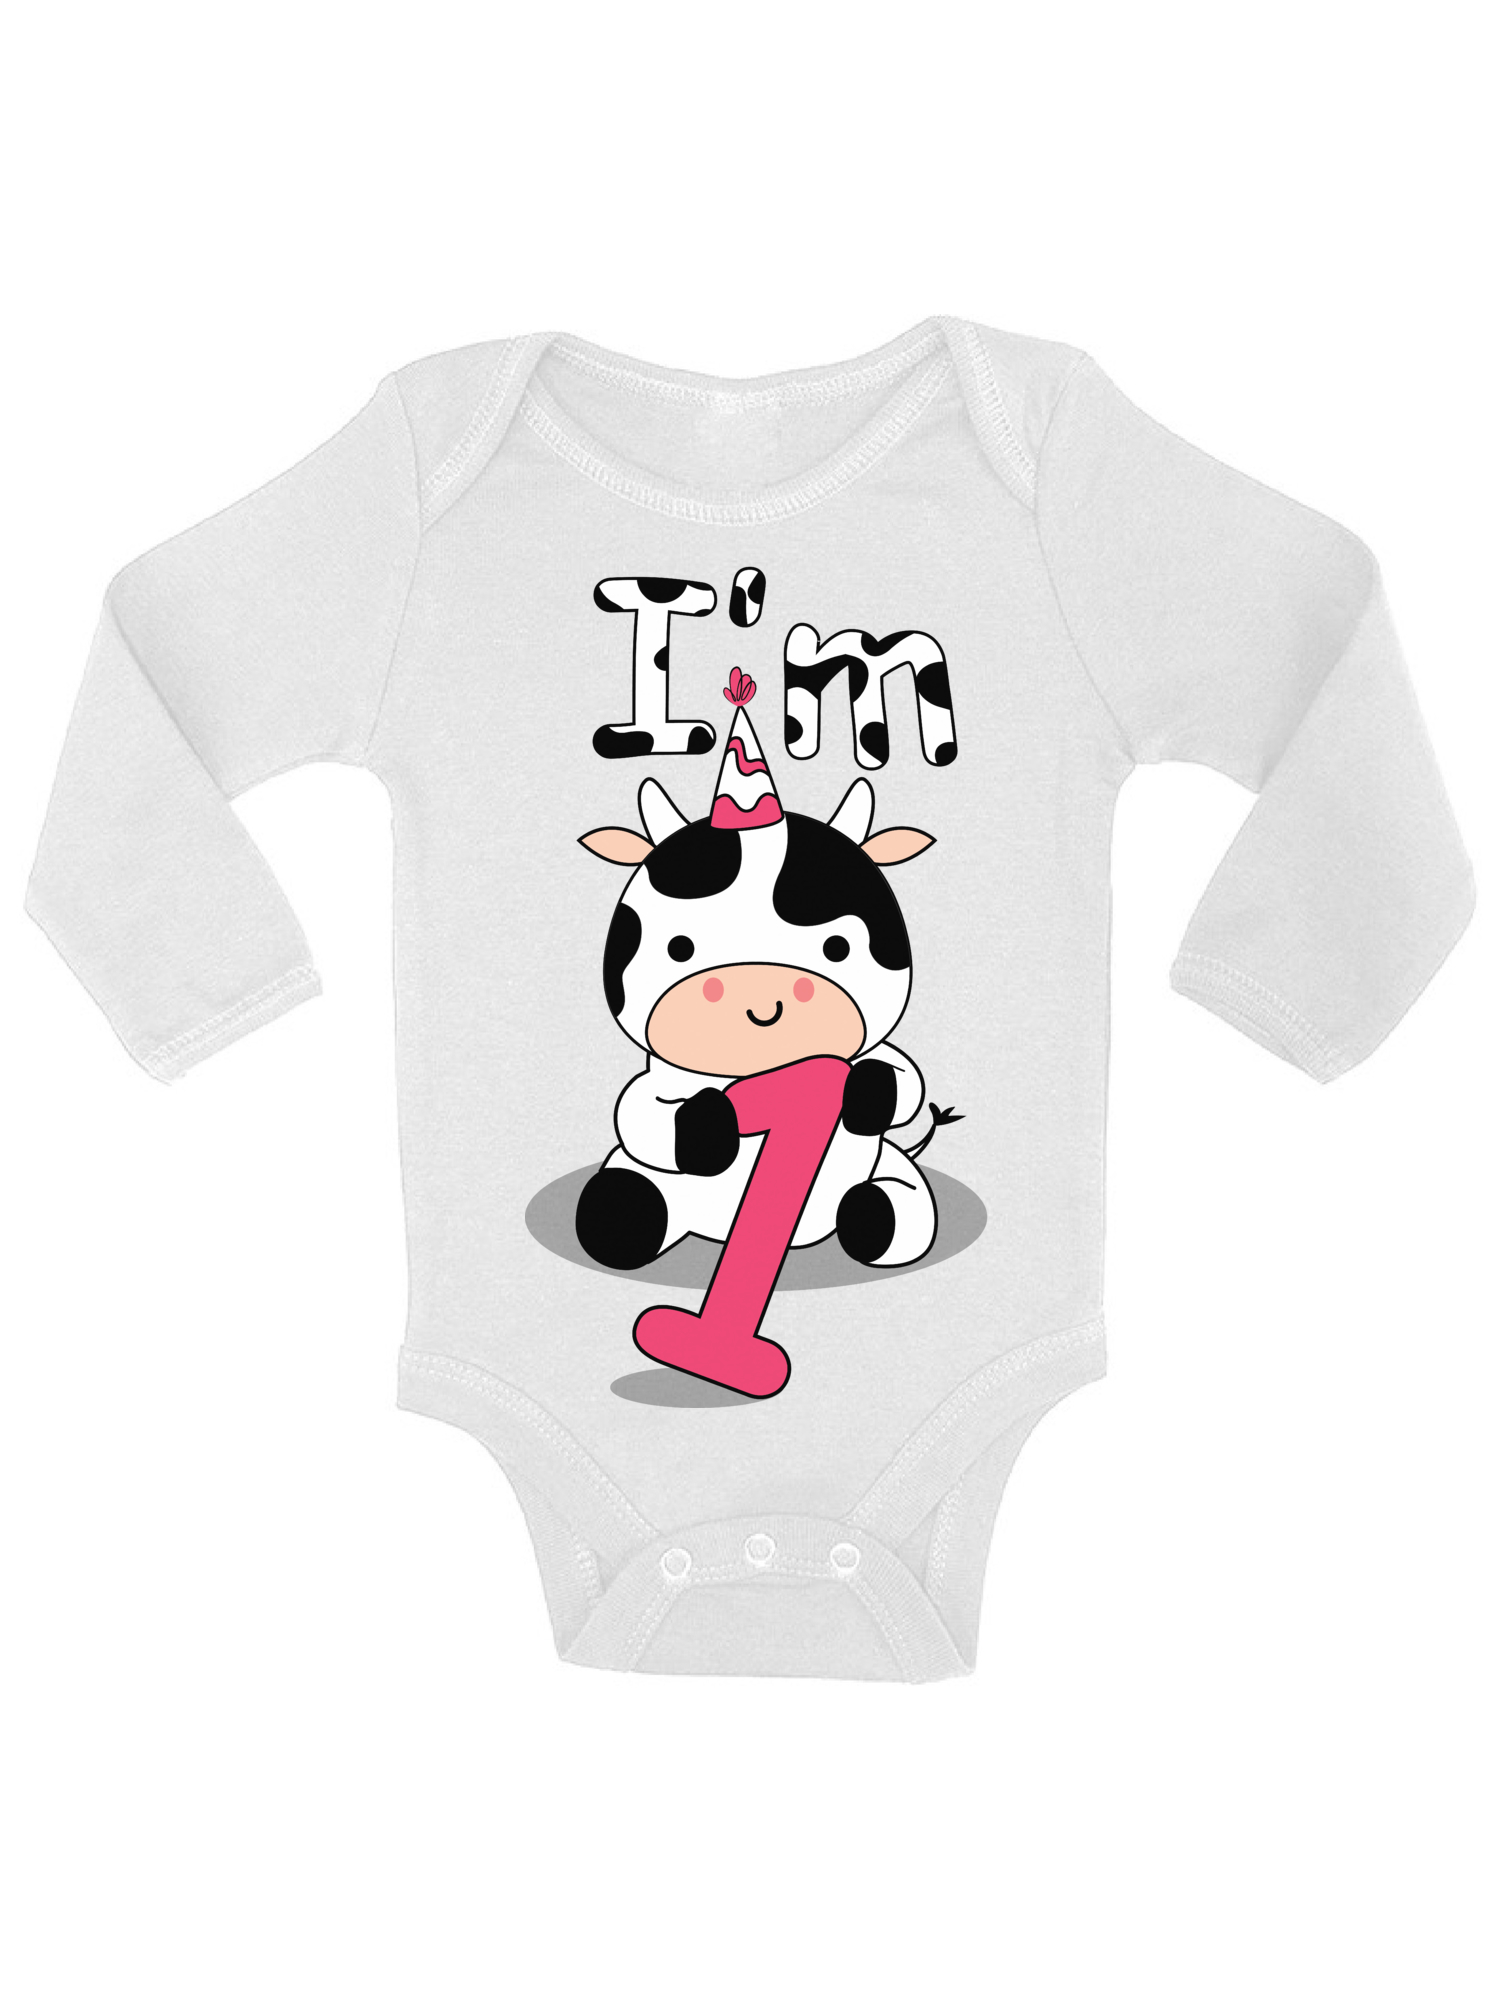 First Birthday Party Cute Cow 1 Year Old Girl Boy Baby Bodysuits Long Sleeve Cow I'm One Outfits My First Birthday Gifts Baby Gifts First Birthday Gifts for Birthday Boy Birthday Girl - image 1 of 4